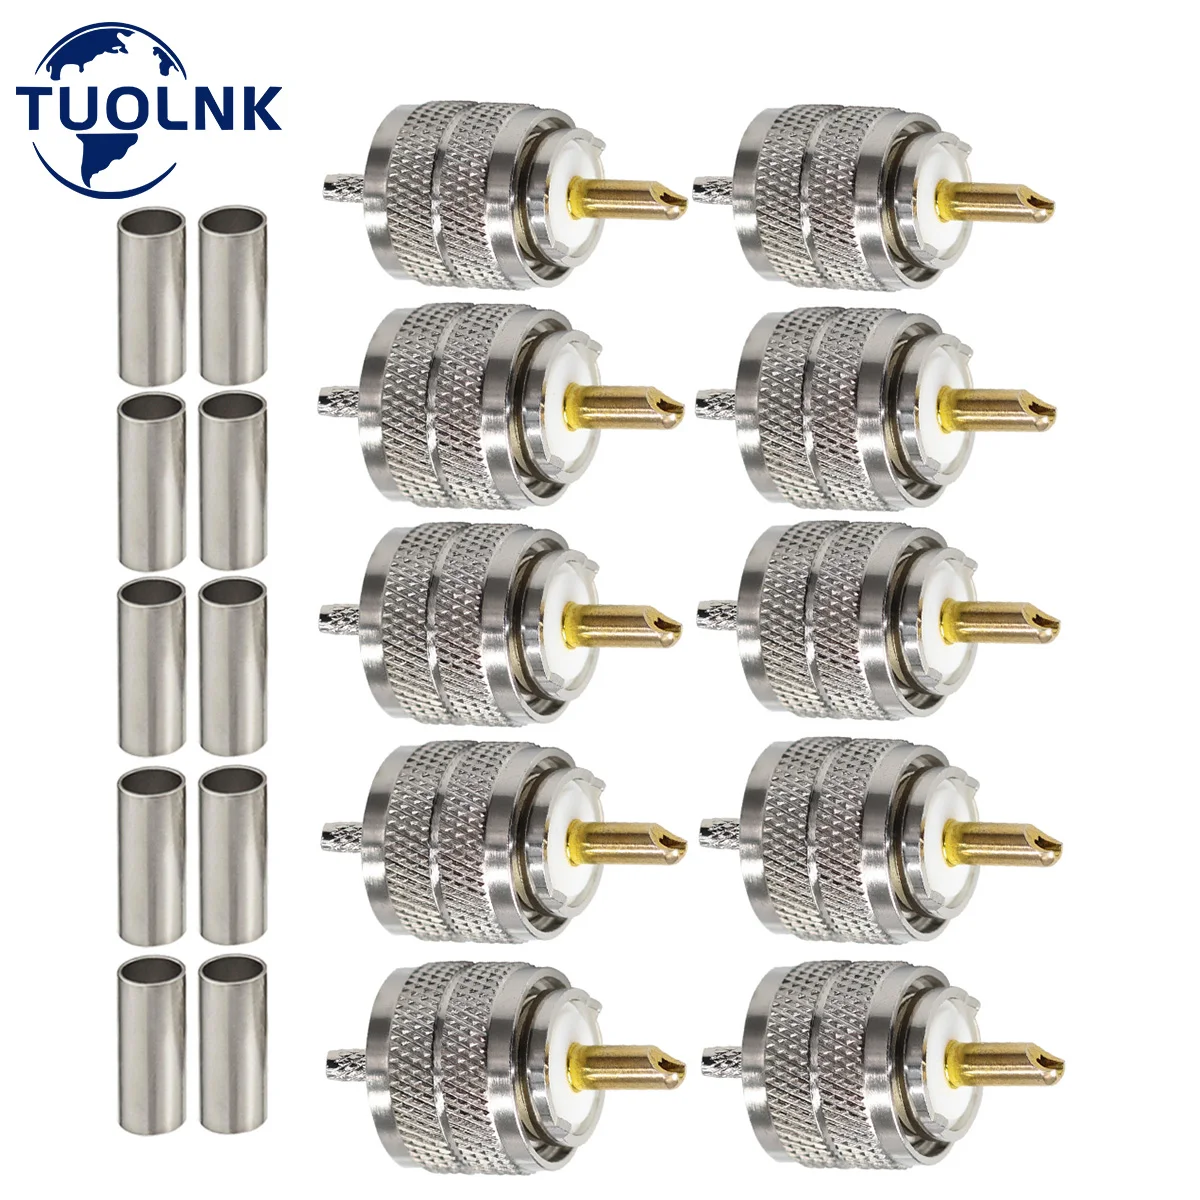 

10pcs/lot TUOLNK UHF Connector PL259 Male Plug Crimp Coax Adapter SO239 PL-259 RF Connector for RG316 RG174 RG179